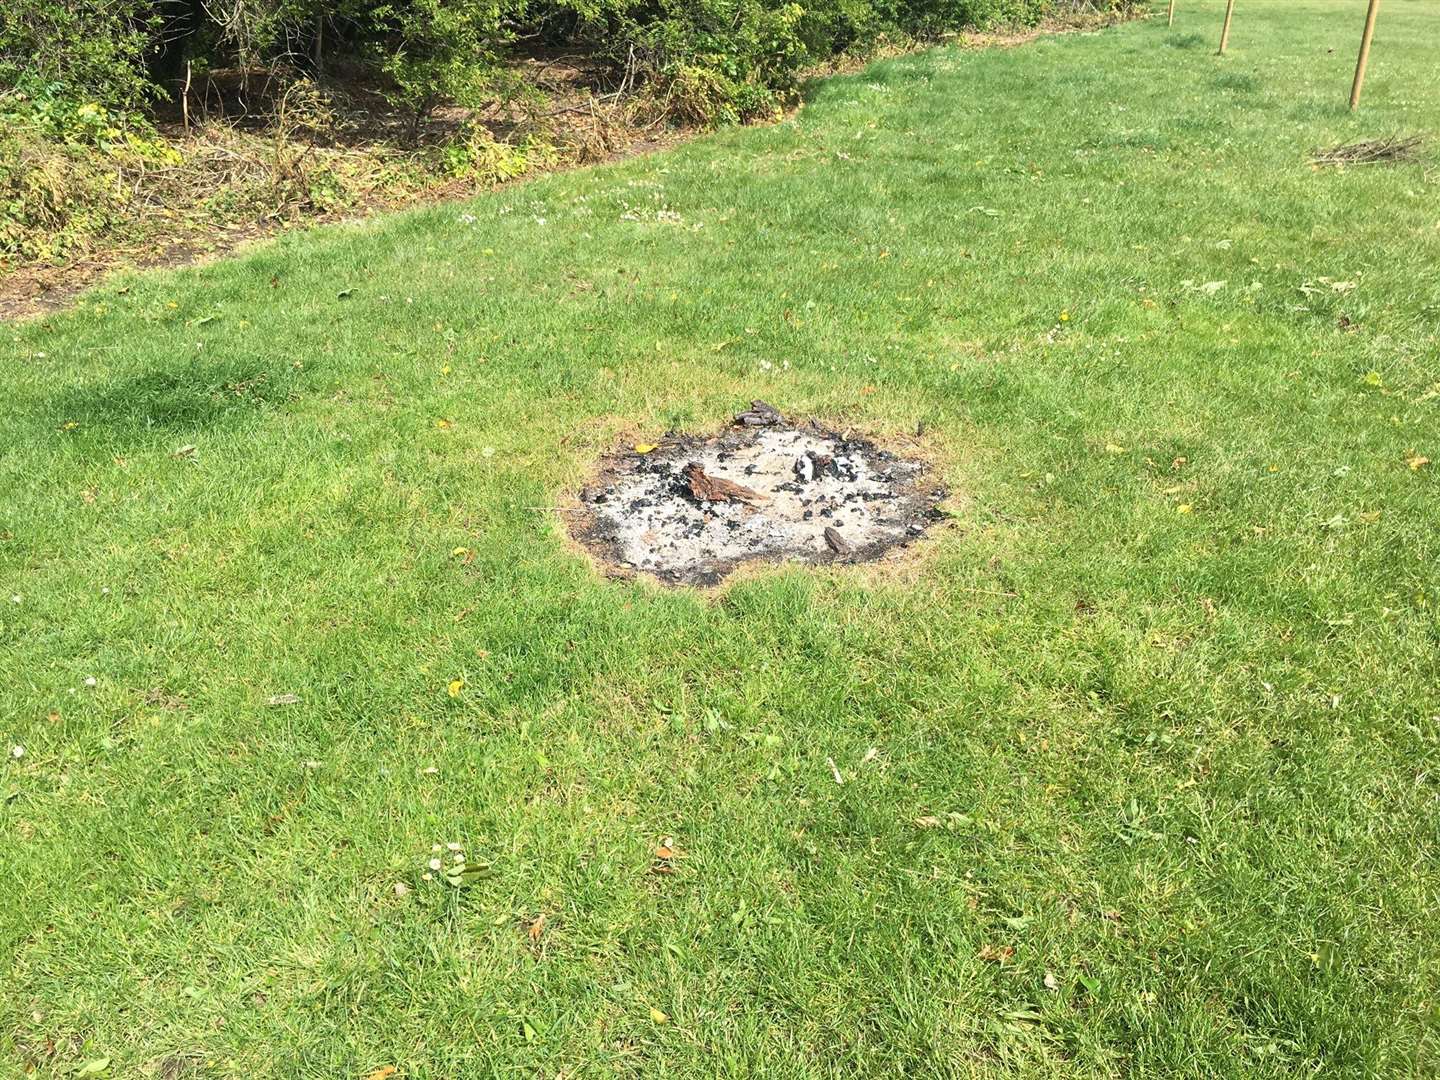 The ground has been left damaged by burning. Photo: Stephen Bailey